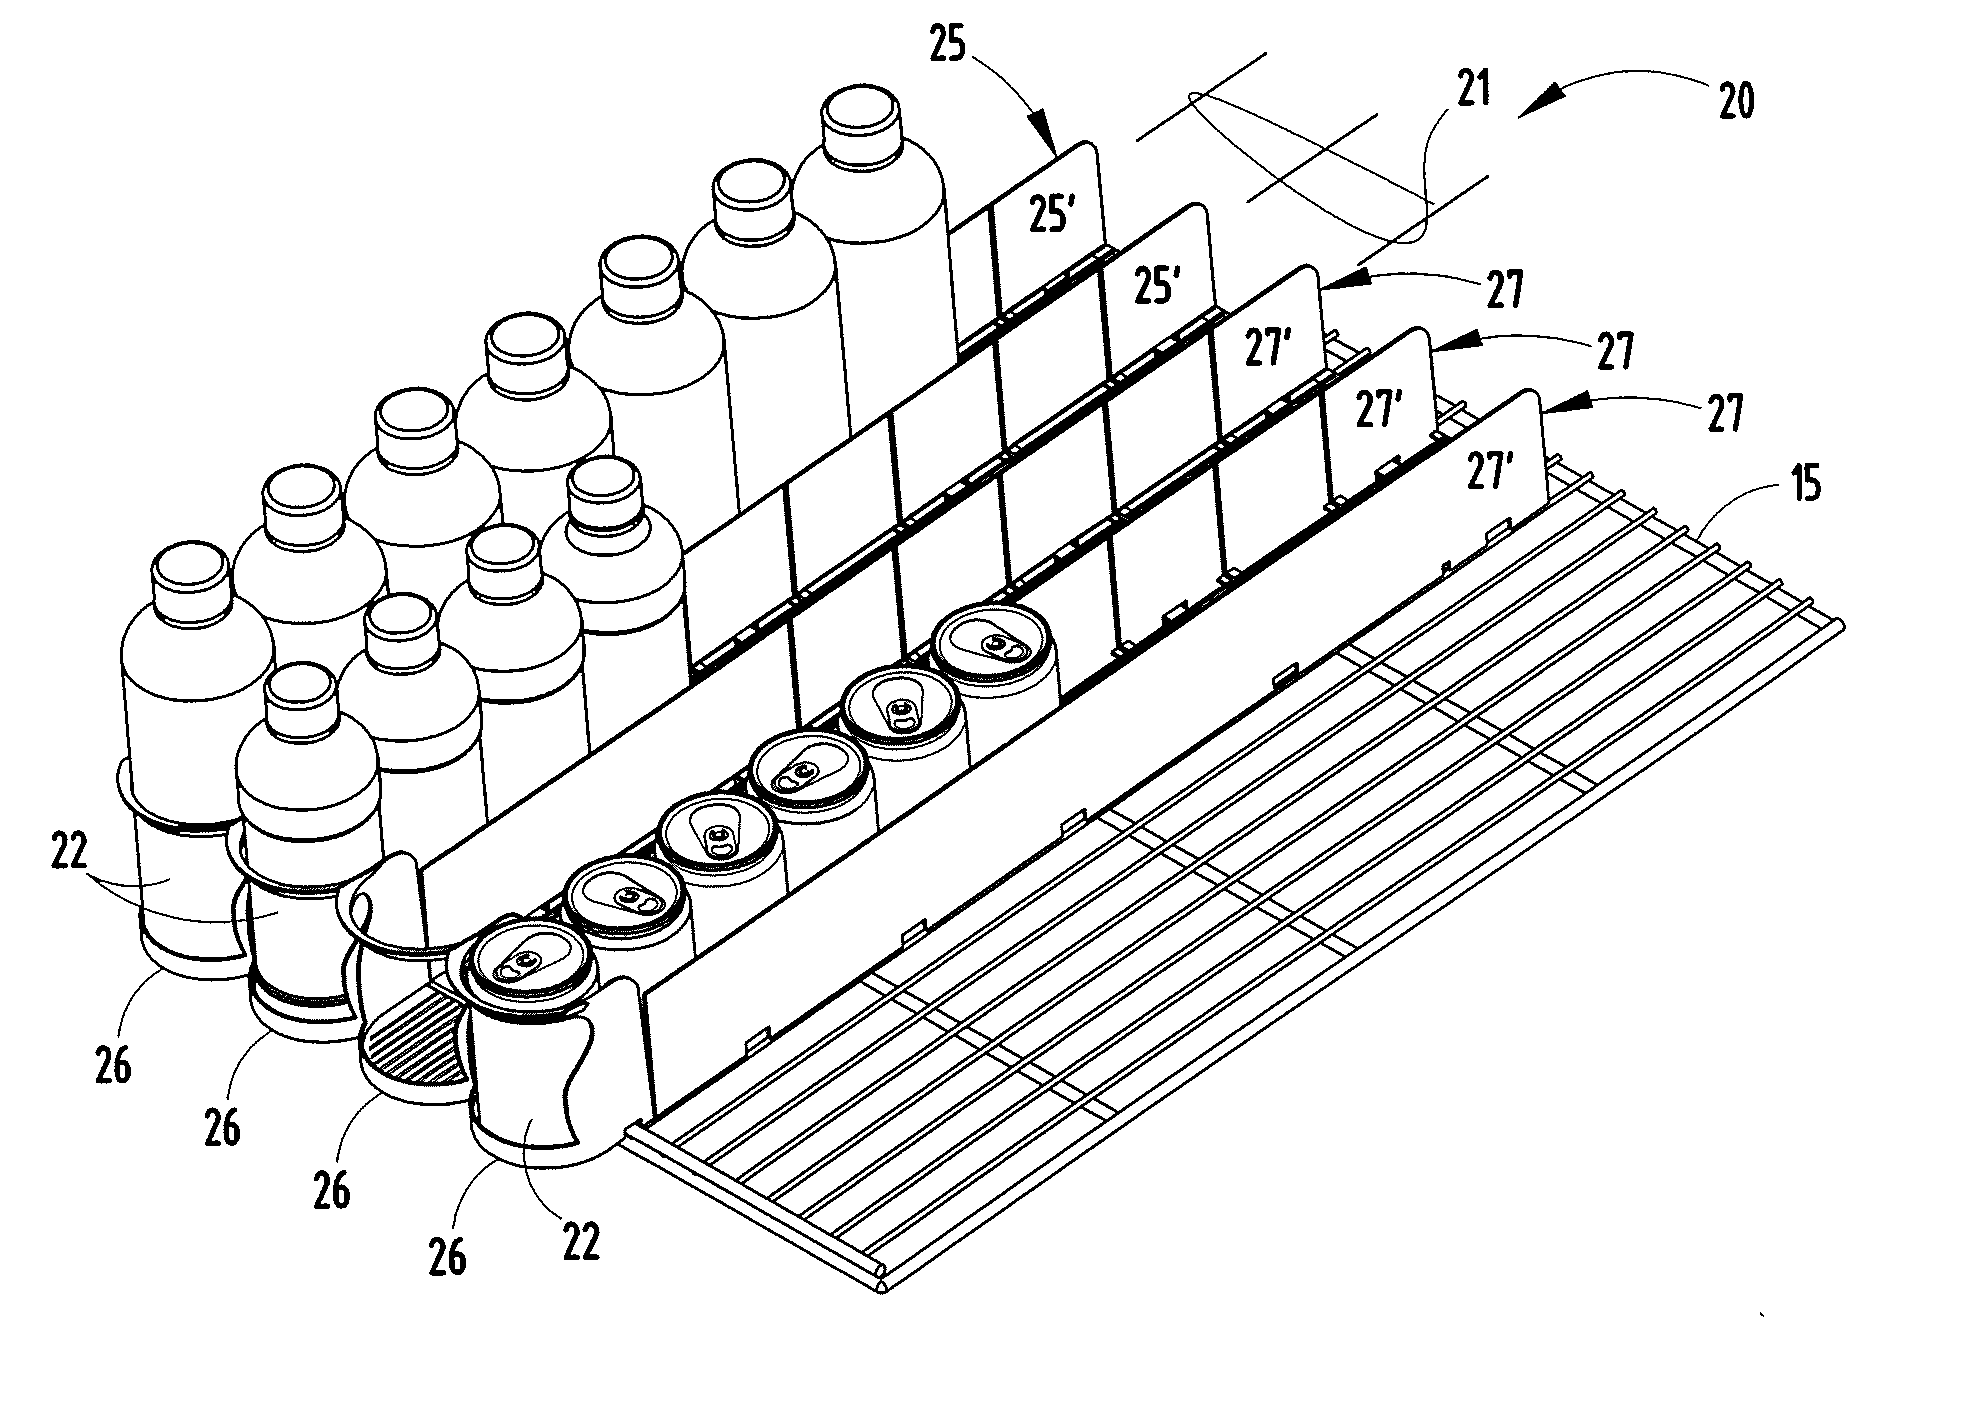 Display channel apparatus